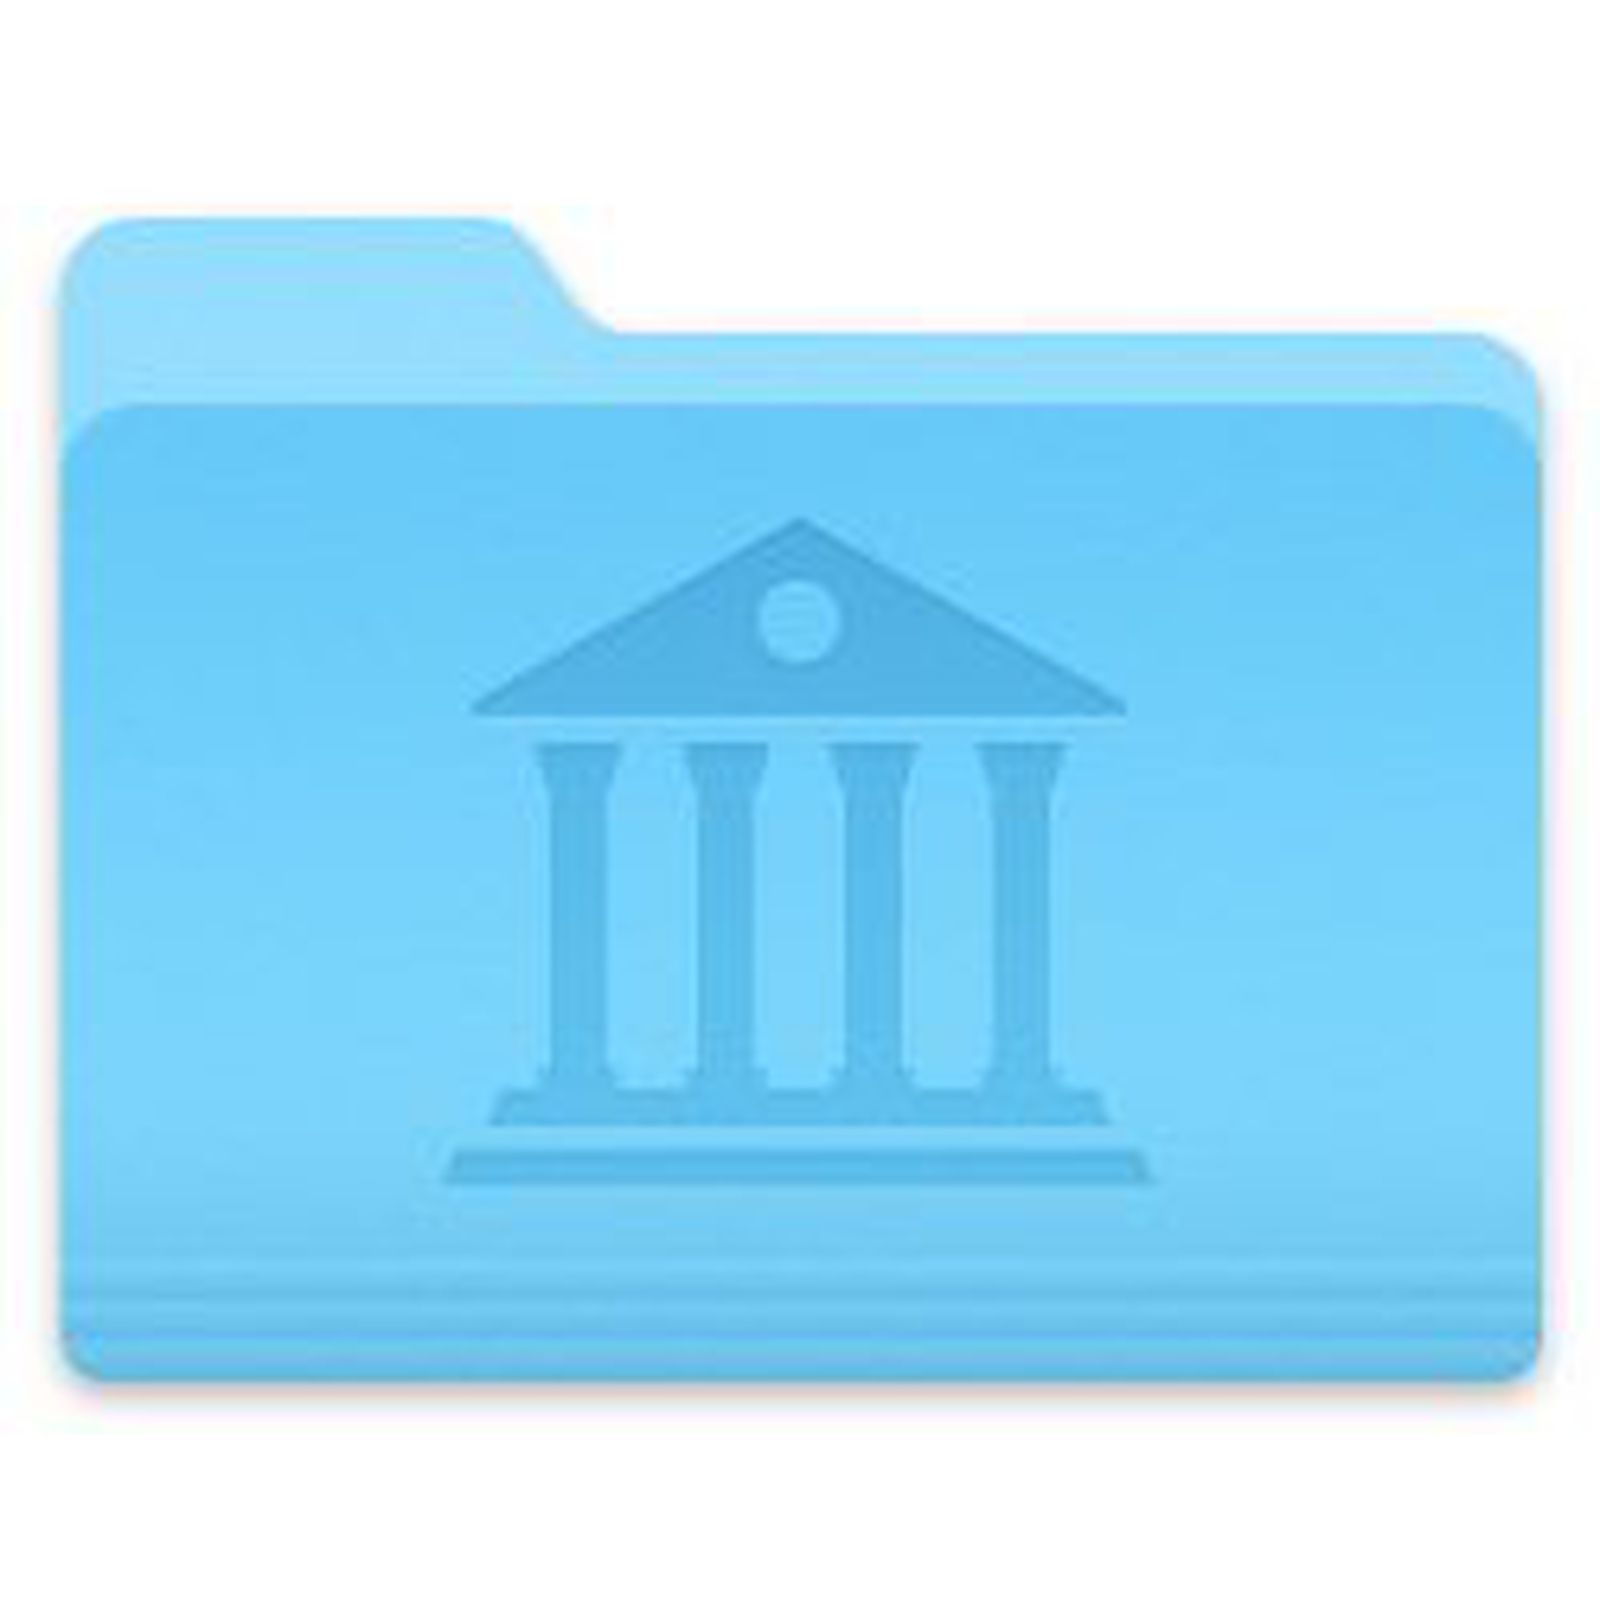 how to see library folder on mac